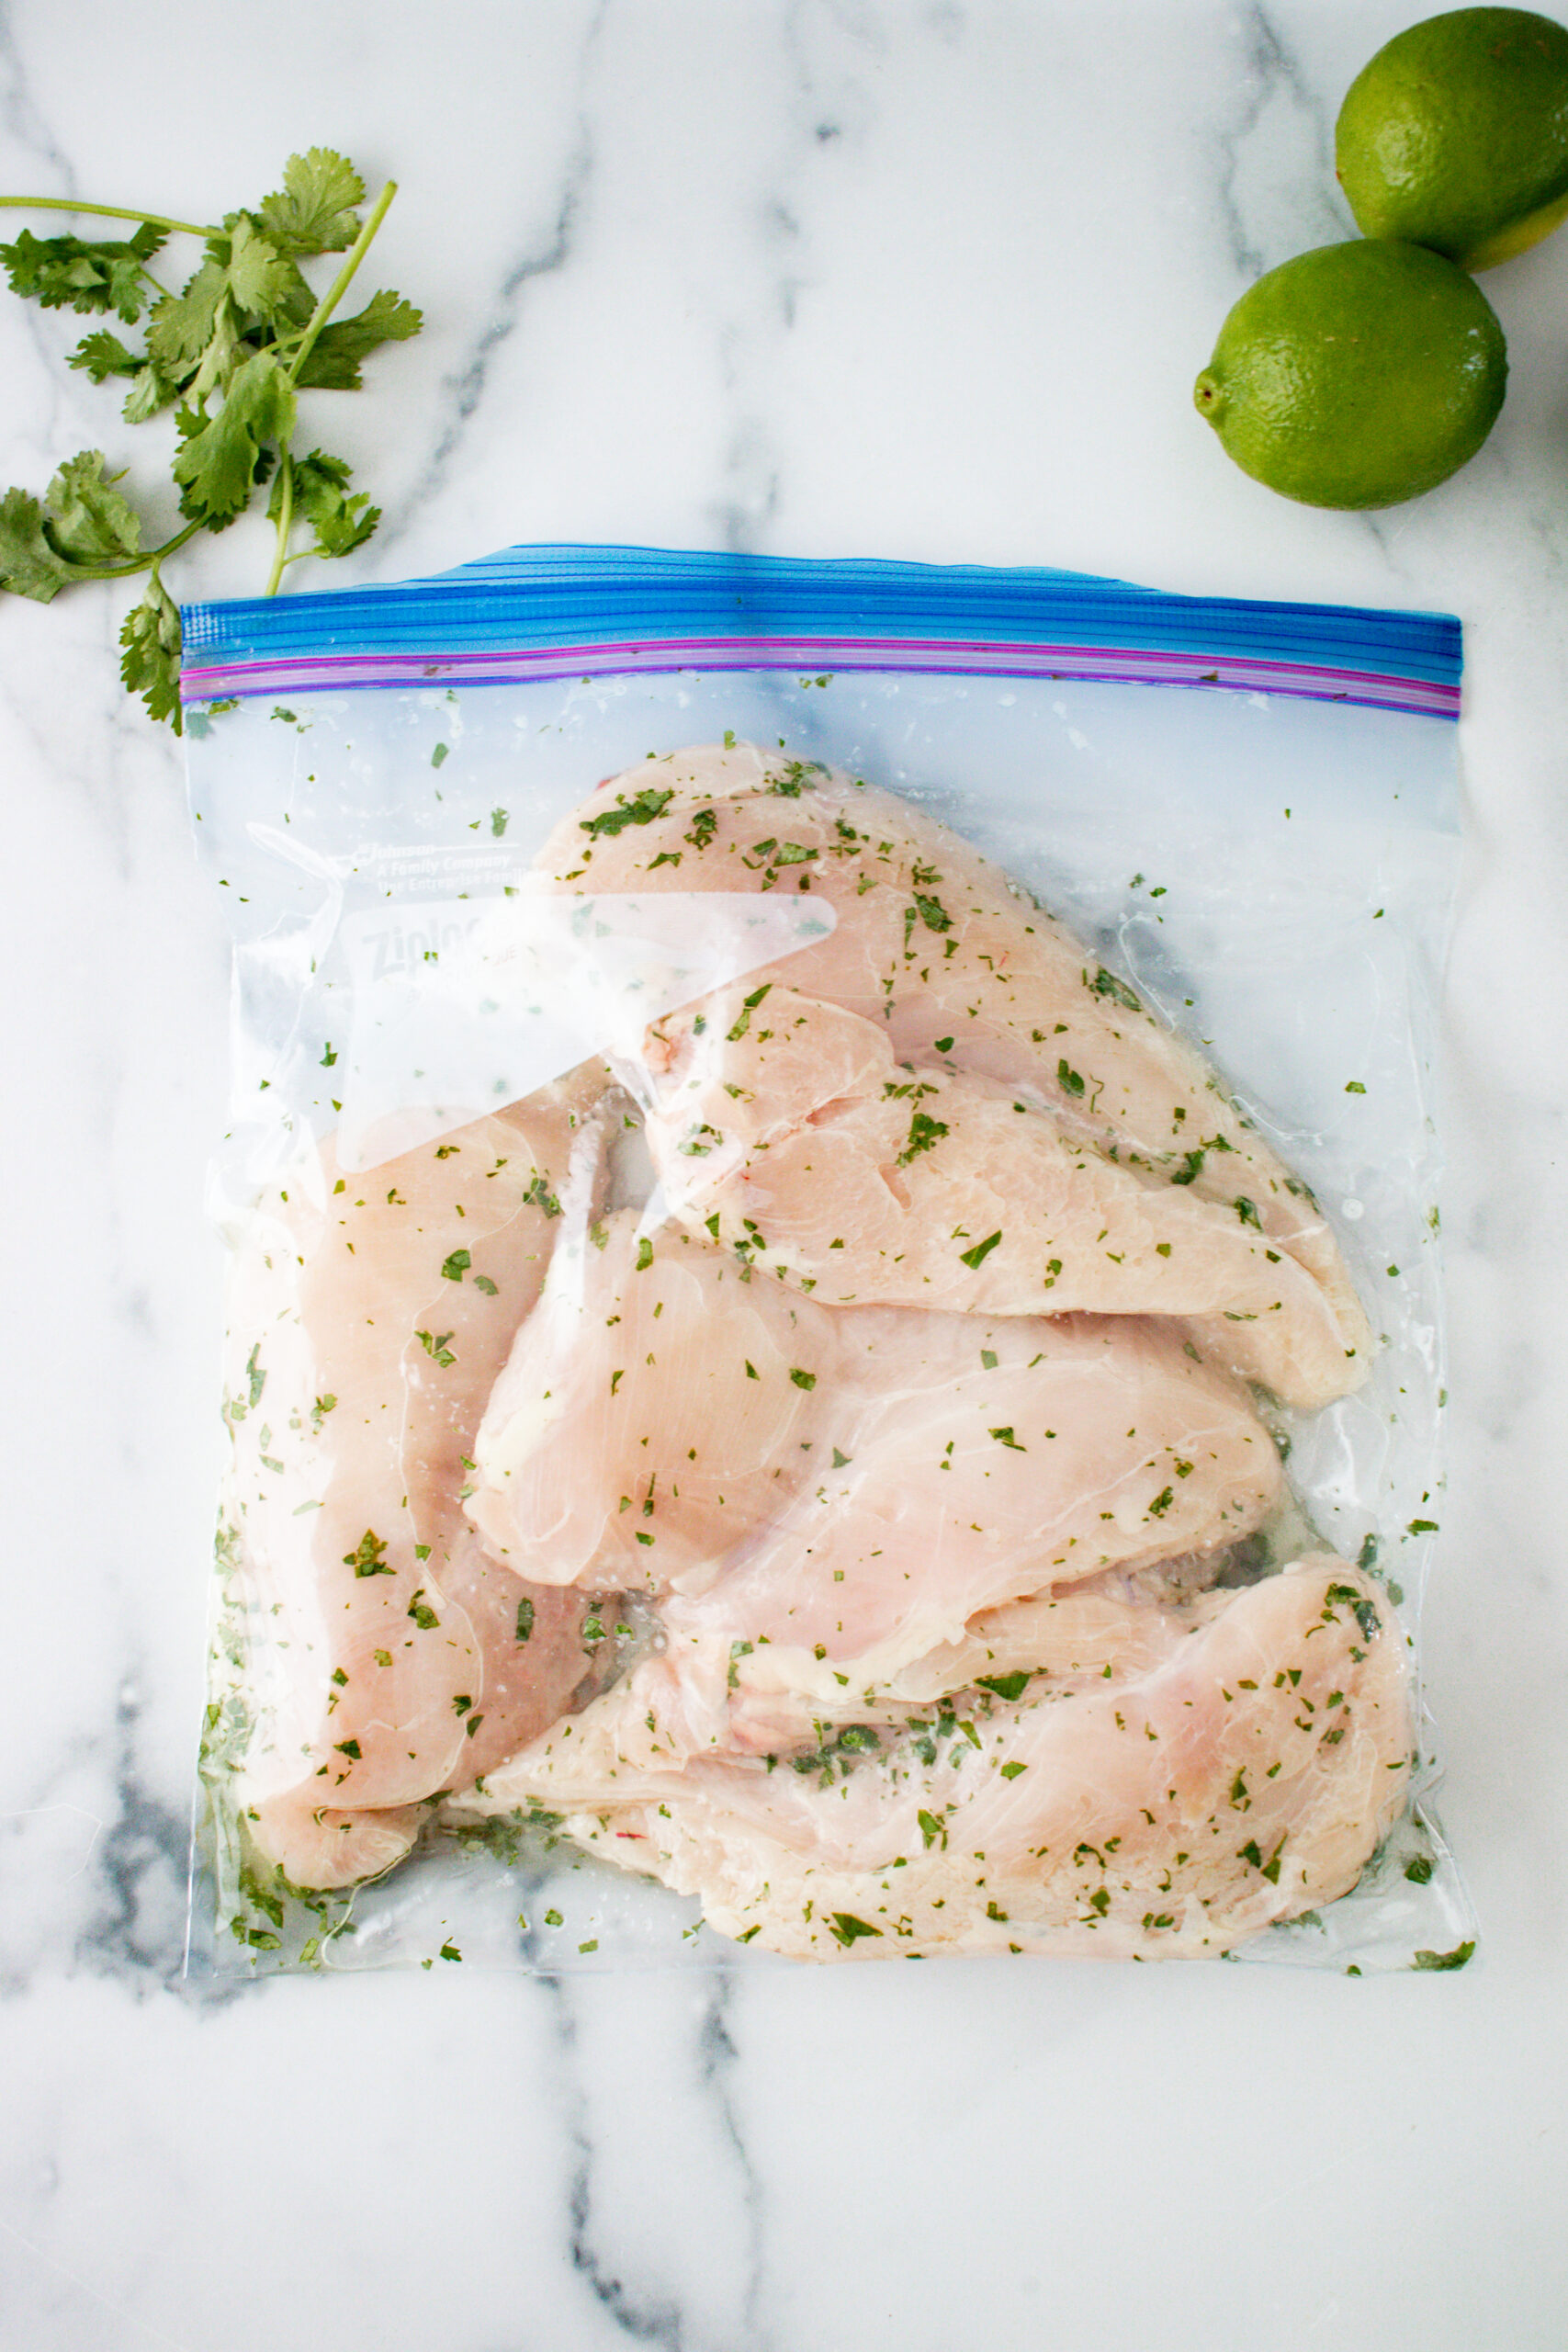 A resealable gallon bag with raw chicken breasts and seasonings with lime and cilantro on the side.